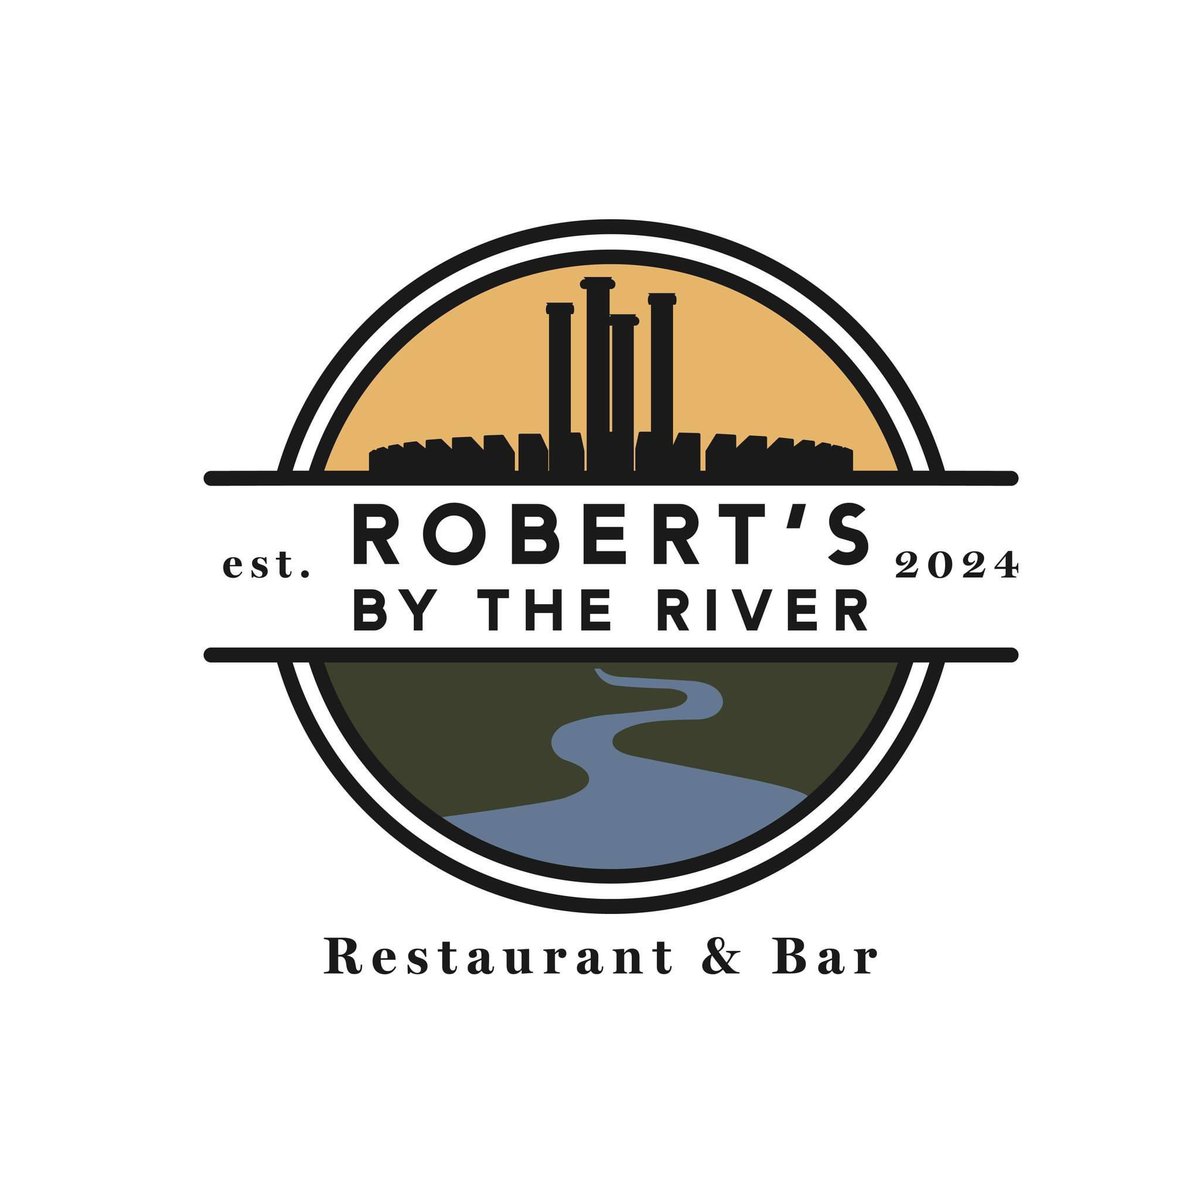 Welcome to the neighborhood, Roberts by the River! The new #DowntownEvansville restaurant opens to the public tomorrow, March 5, @ 10 AM. They will serve Southern comfort food and a brunch buffet on Sundays. 📍 6 Walnut ⏰ Mon - Sat: 10 AM - 9 PM & Sun: 10 AM - 3 PM #DTEVV